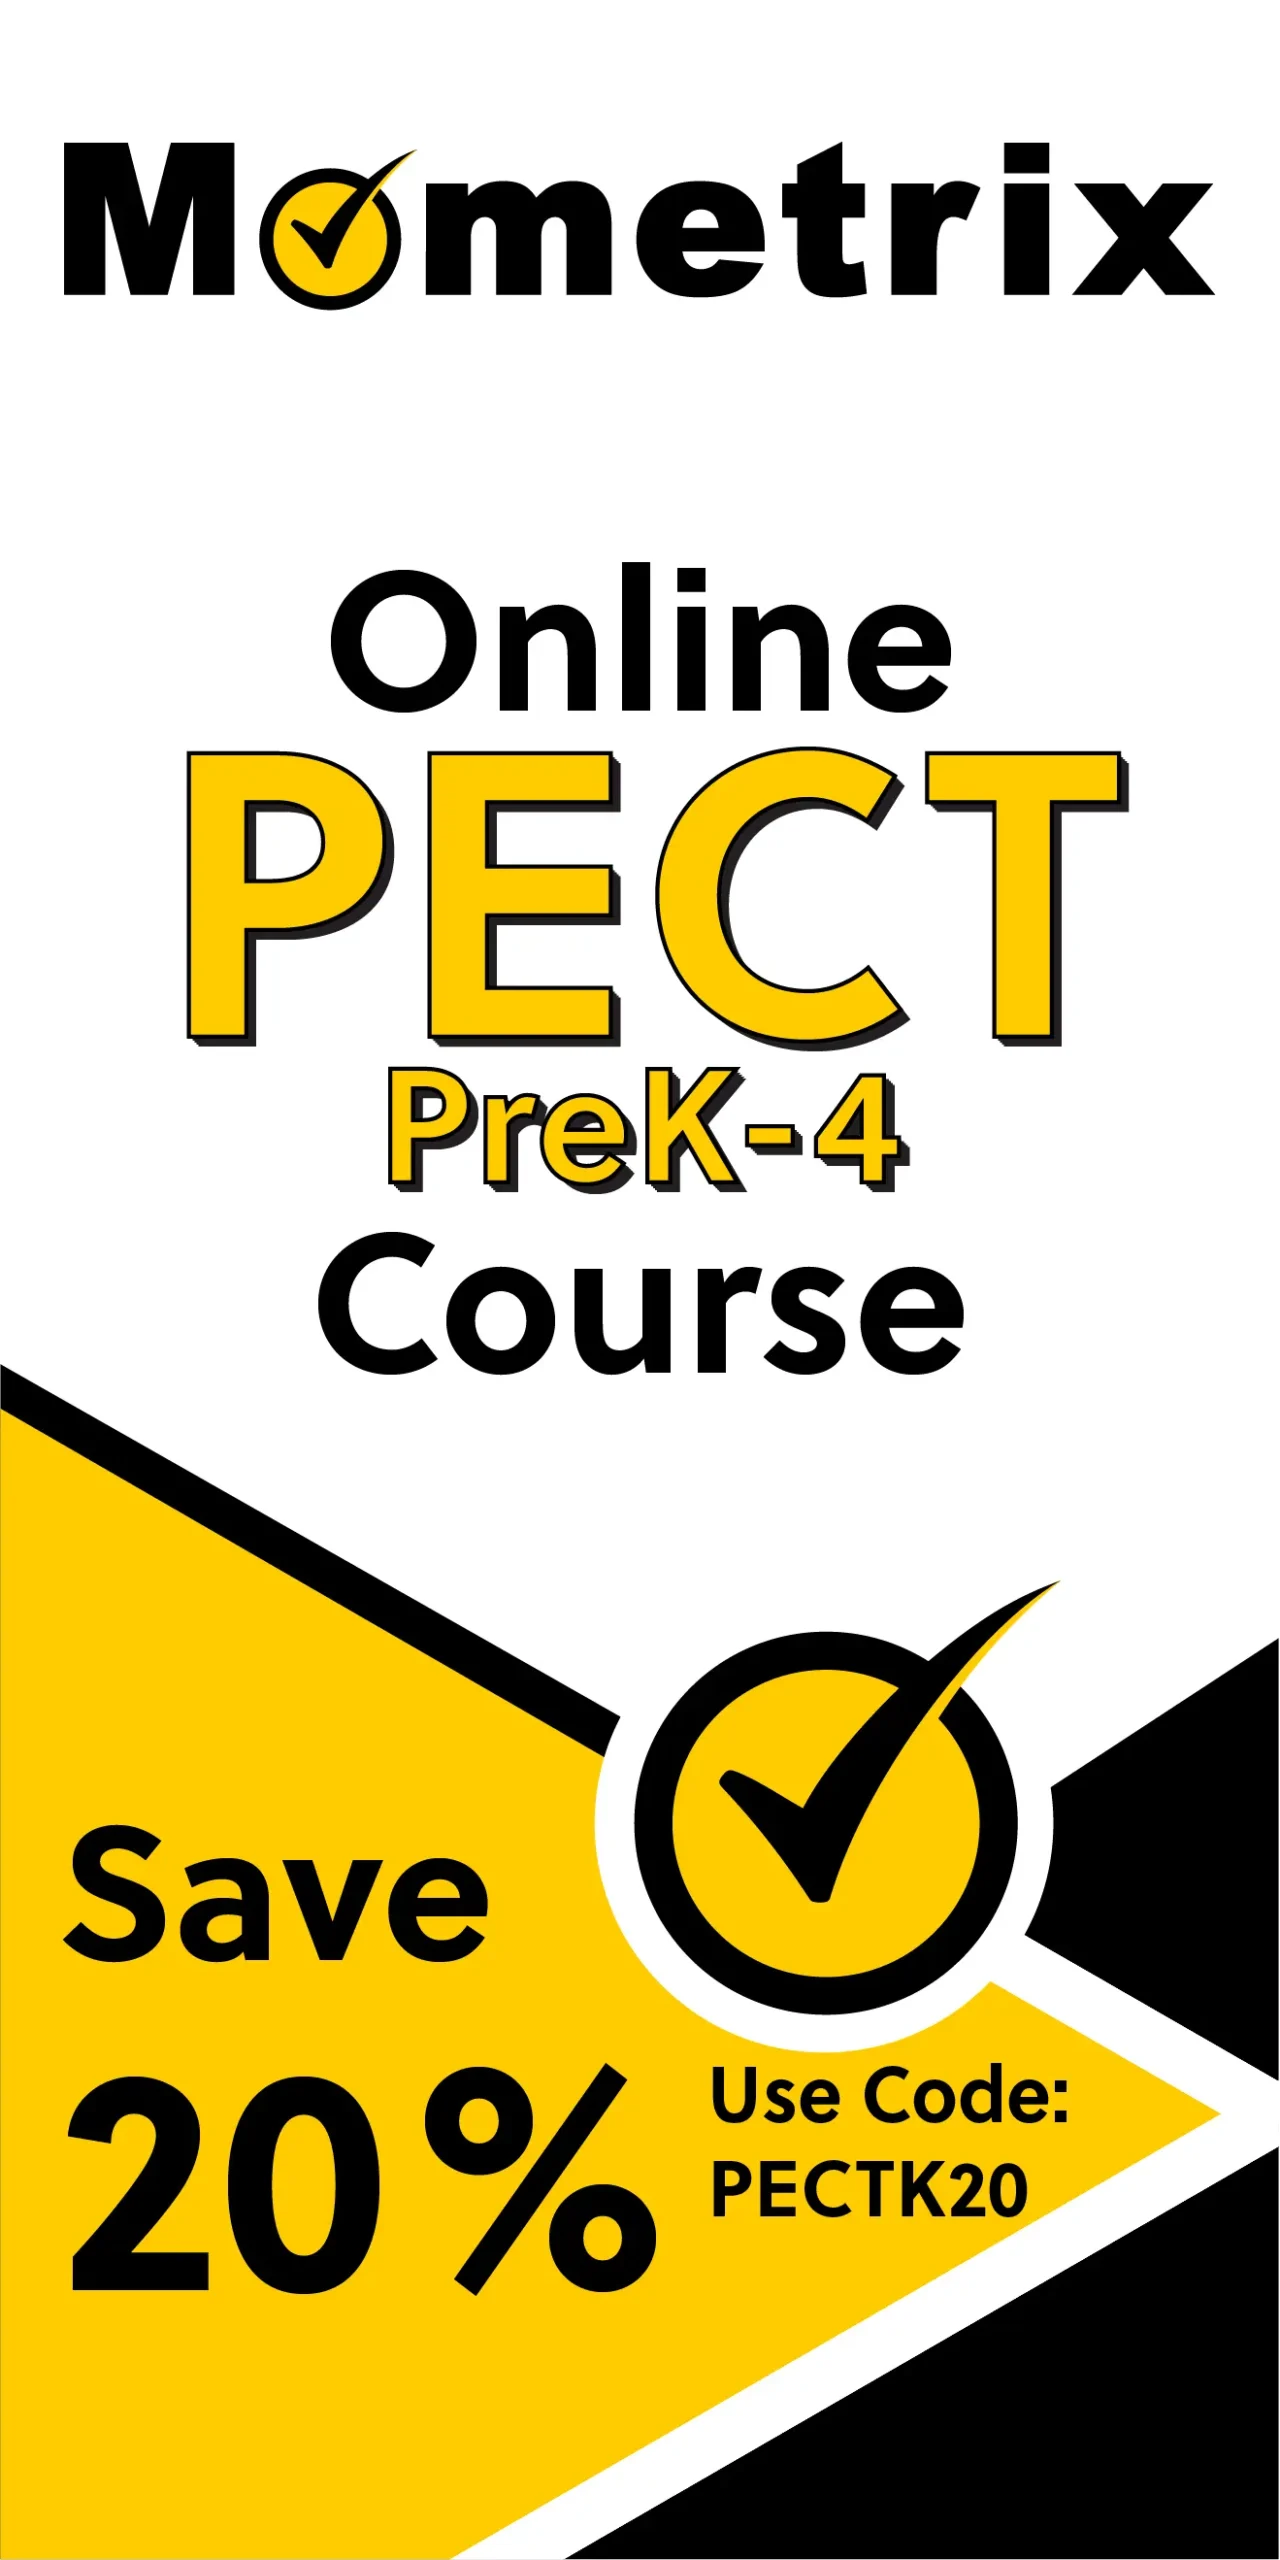 Click here for 20% off of Mometrix PECT PreK-4 online course. Use code: PECTK20